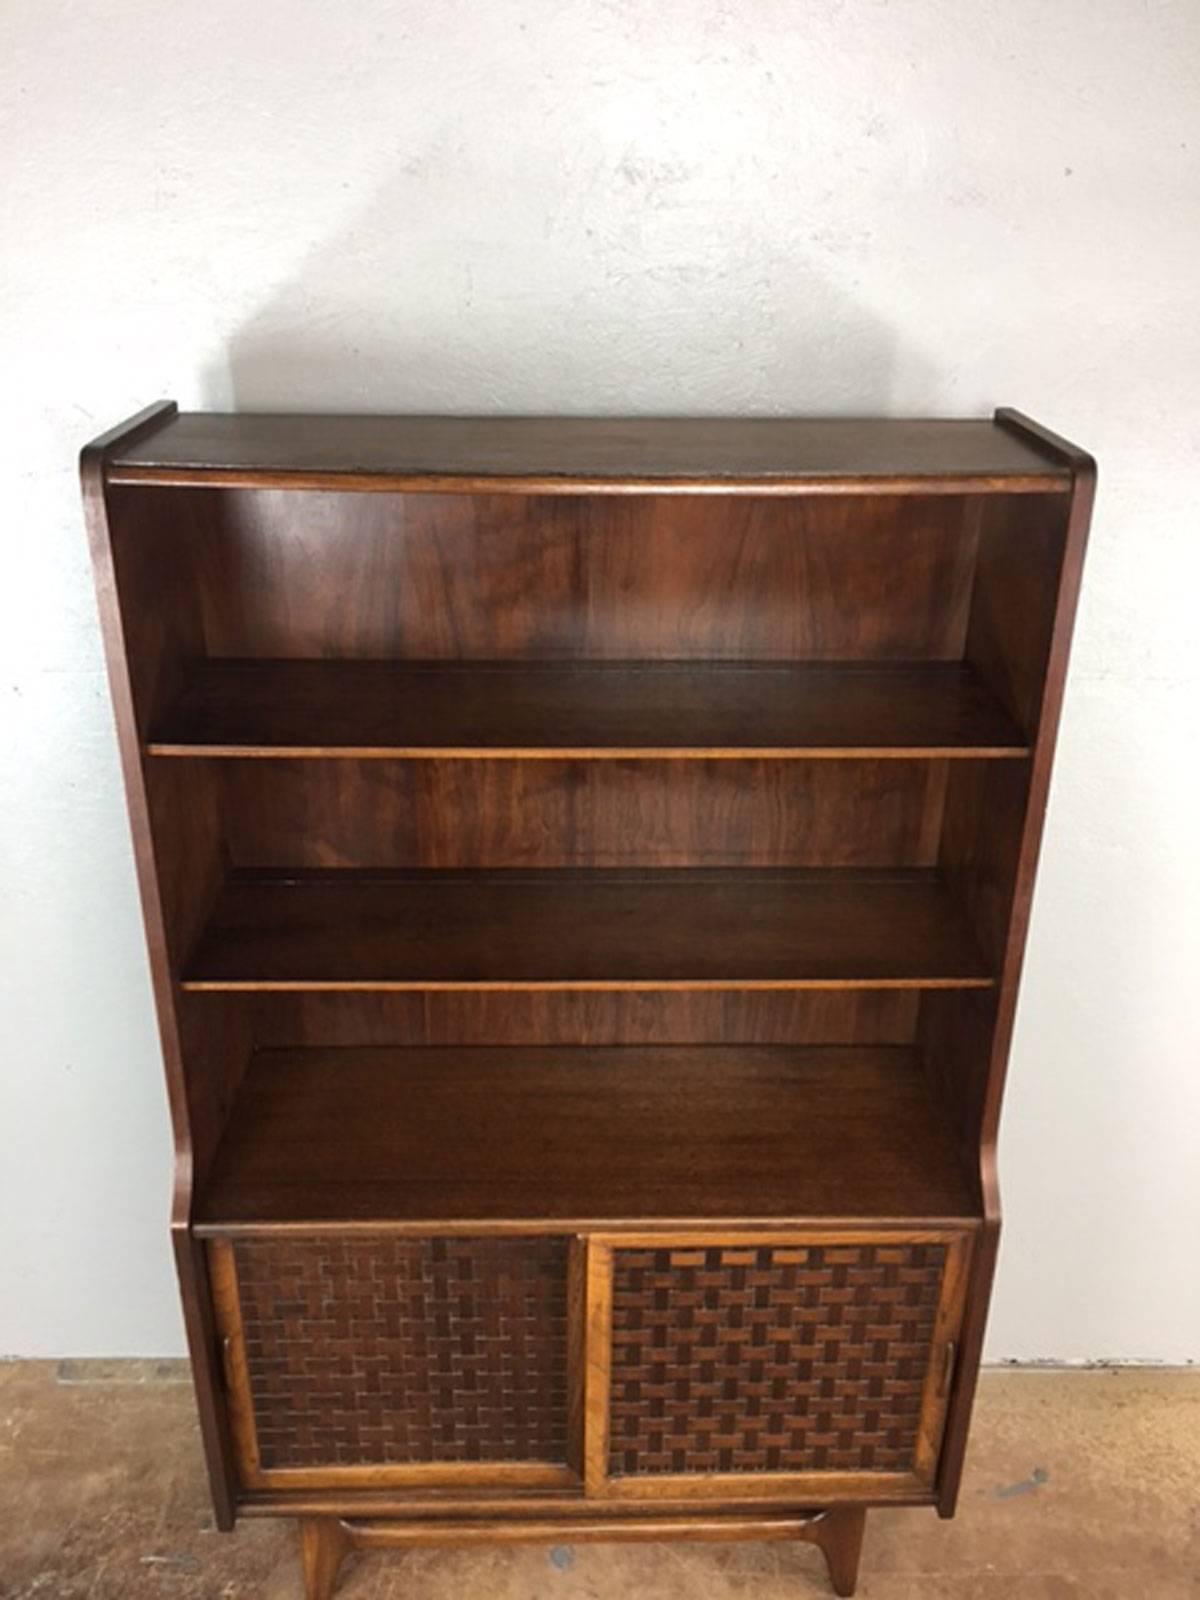 1960s Lane basket weave hutch and bookcase in walnut. This piece is simple but has just enough added elegance and uniqueness to make it a Fine addition to your Mid-Century Modern collection. Original condition. Simply polished up.